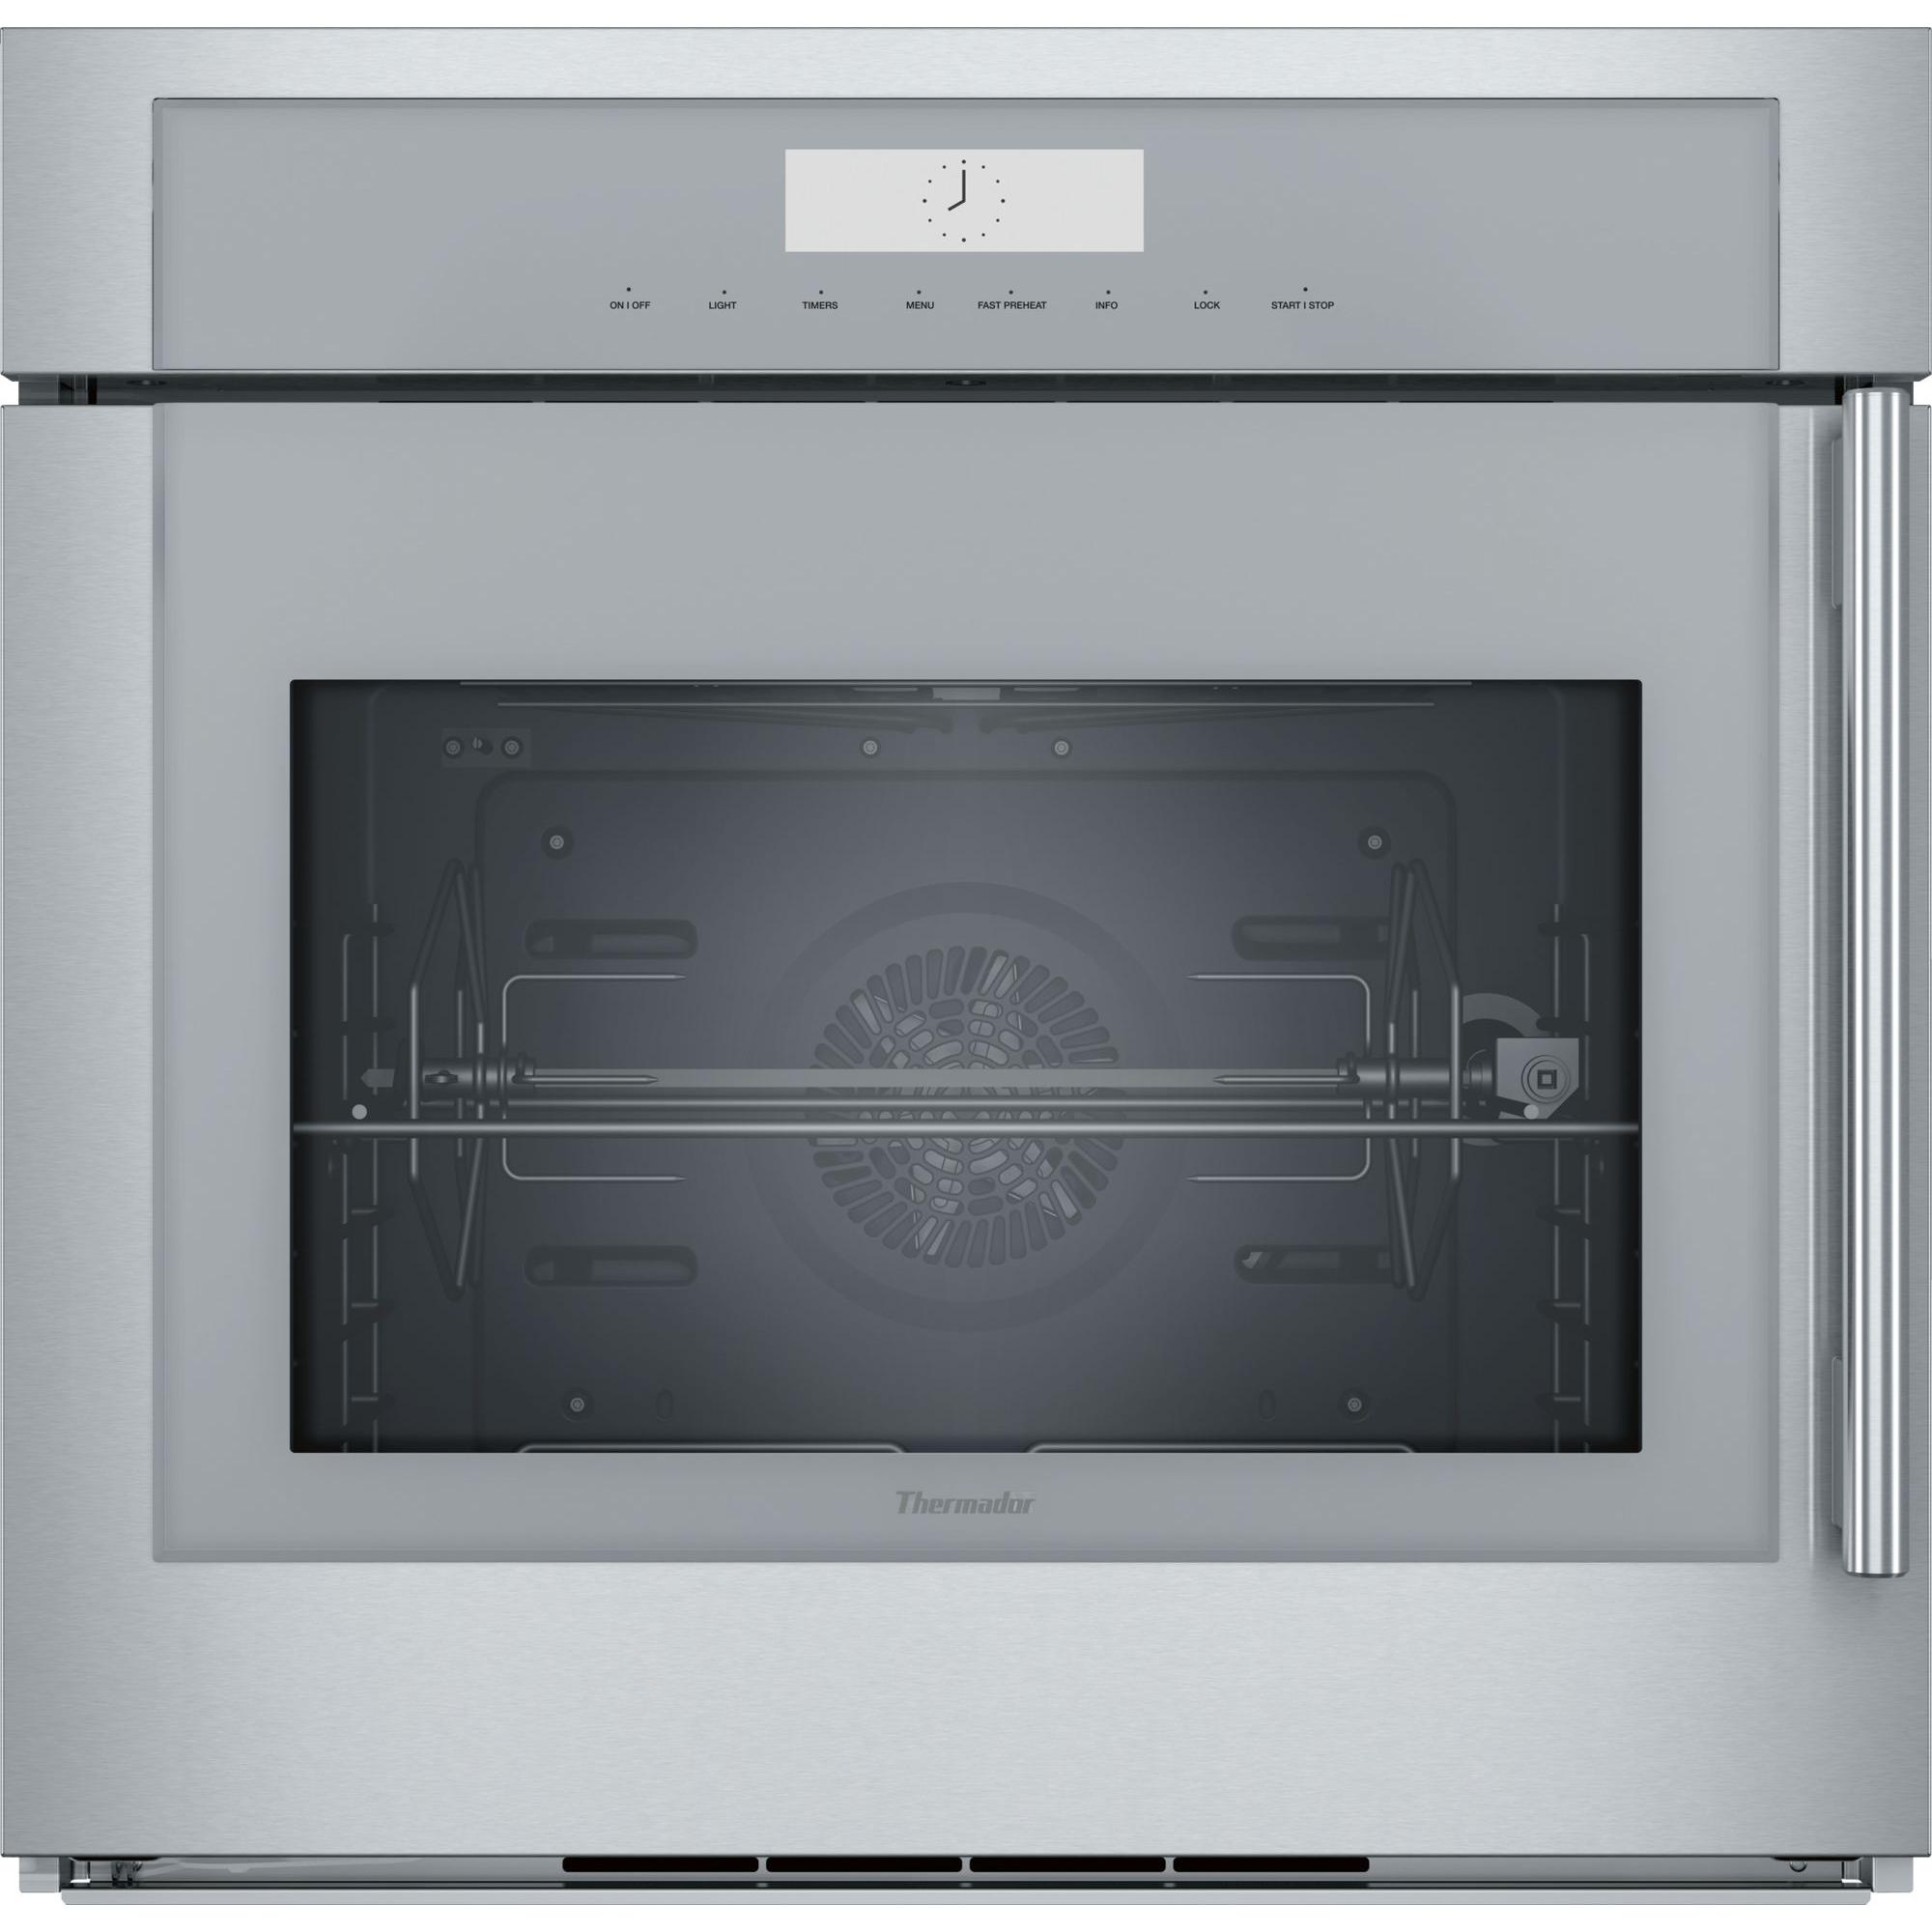 Thermador 30-inch, 4.5 cu.ft. Single Built-in Wall Oven with Home Connect MED301LWS